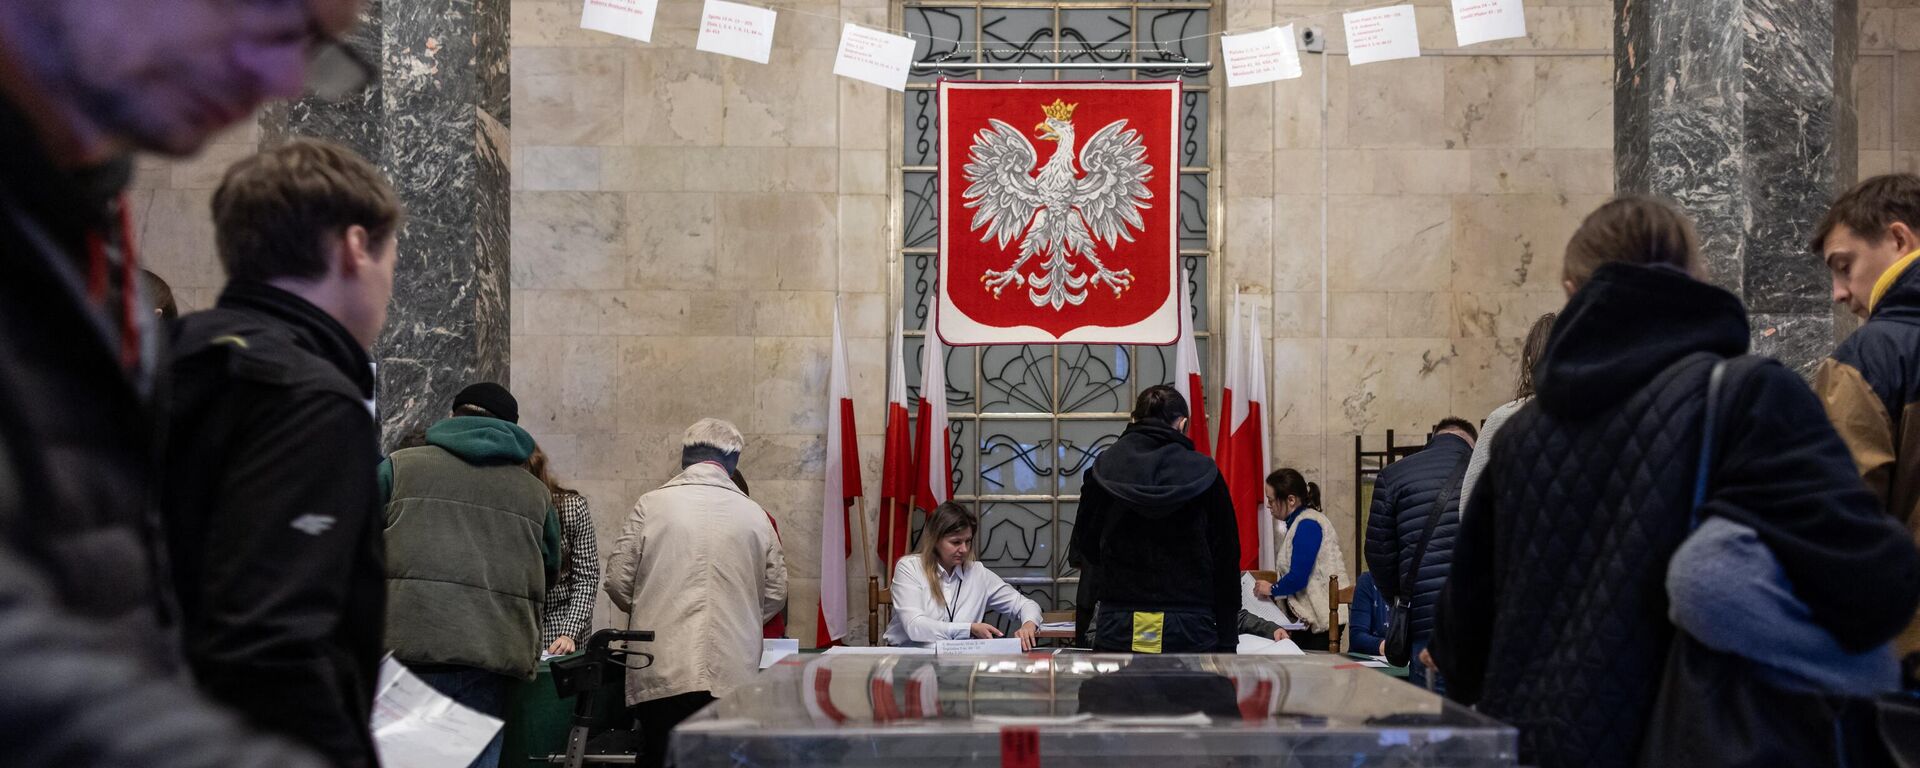 People cast their votes in the polling station at the Palace of Culture in Warsaw, Poland on October 15, 2023, during parliamentary elections. - Sputnik International, 1920, 17.10.2023